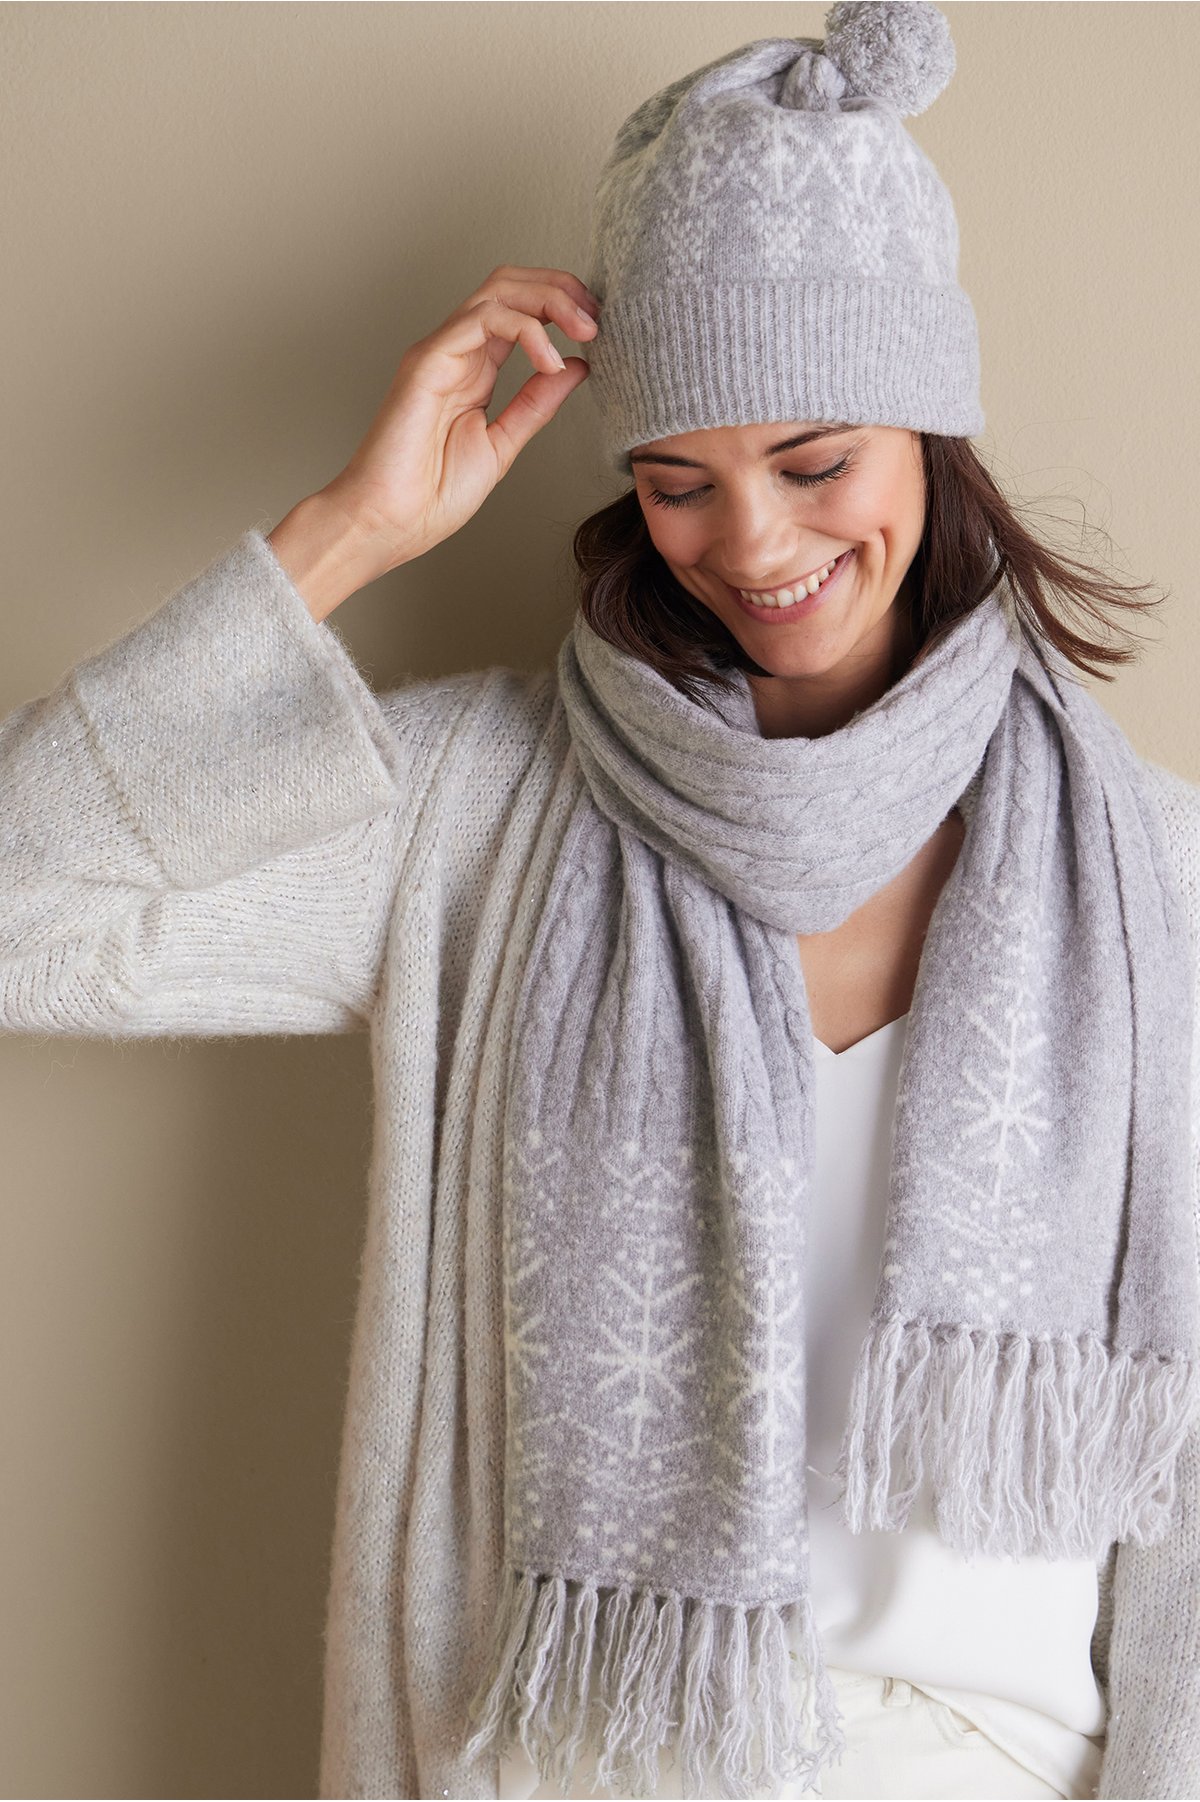 Falala Jacquard Hat & Scarf Set by Soft Surroundings, in Heather Grey/White size One Size